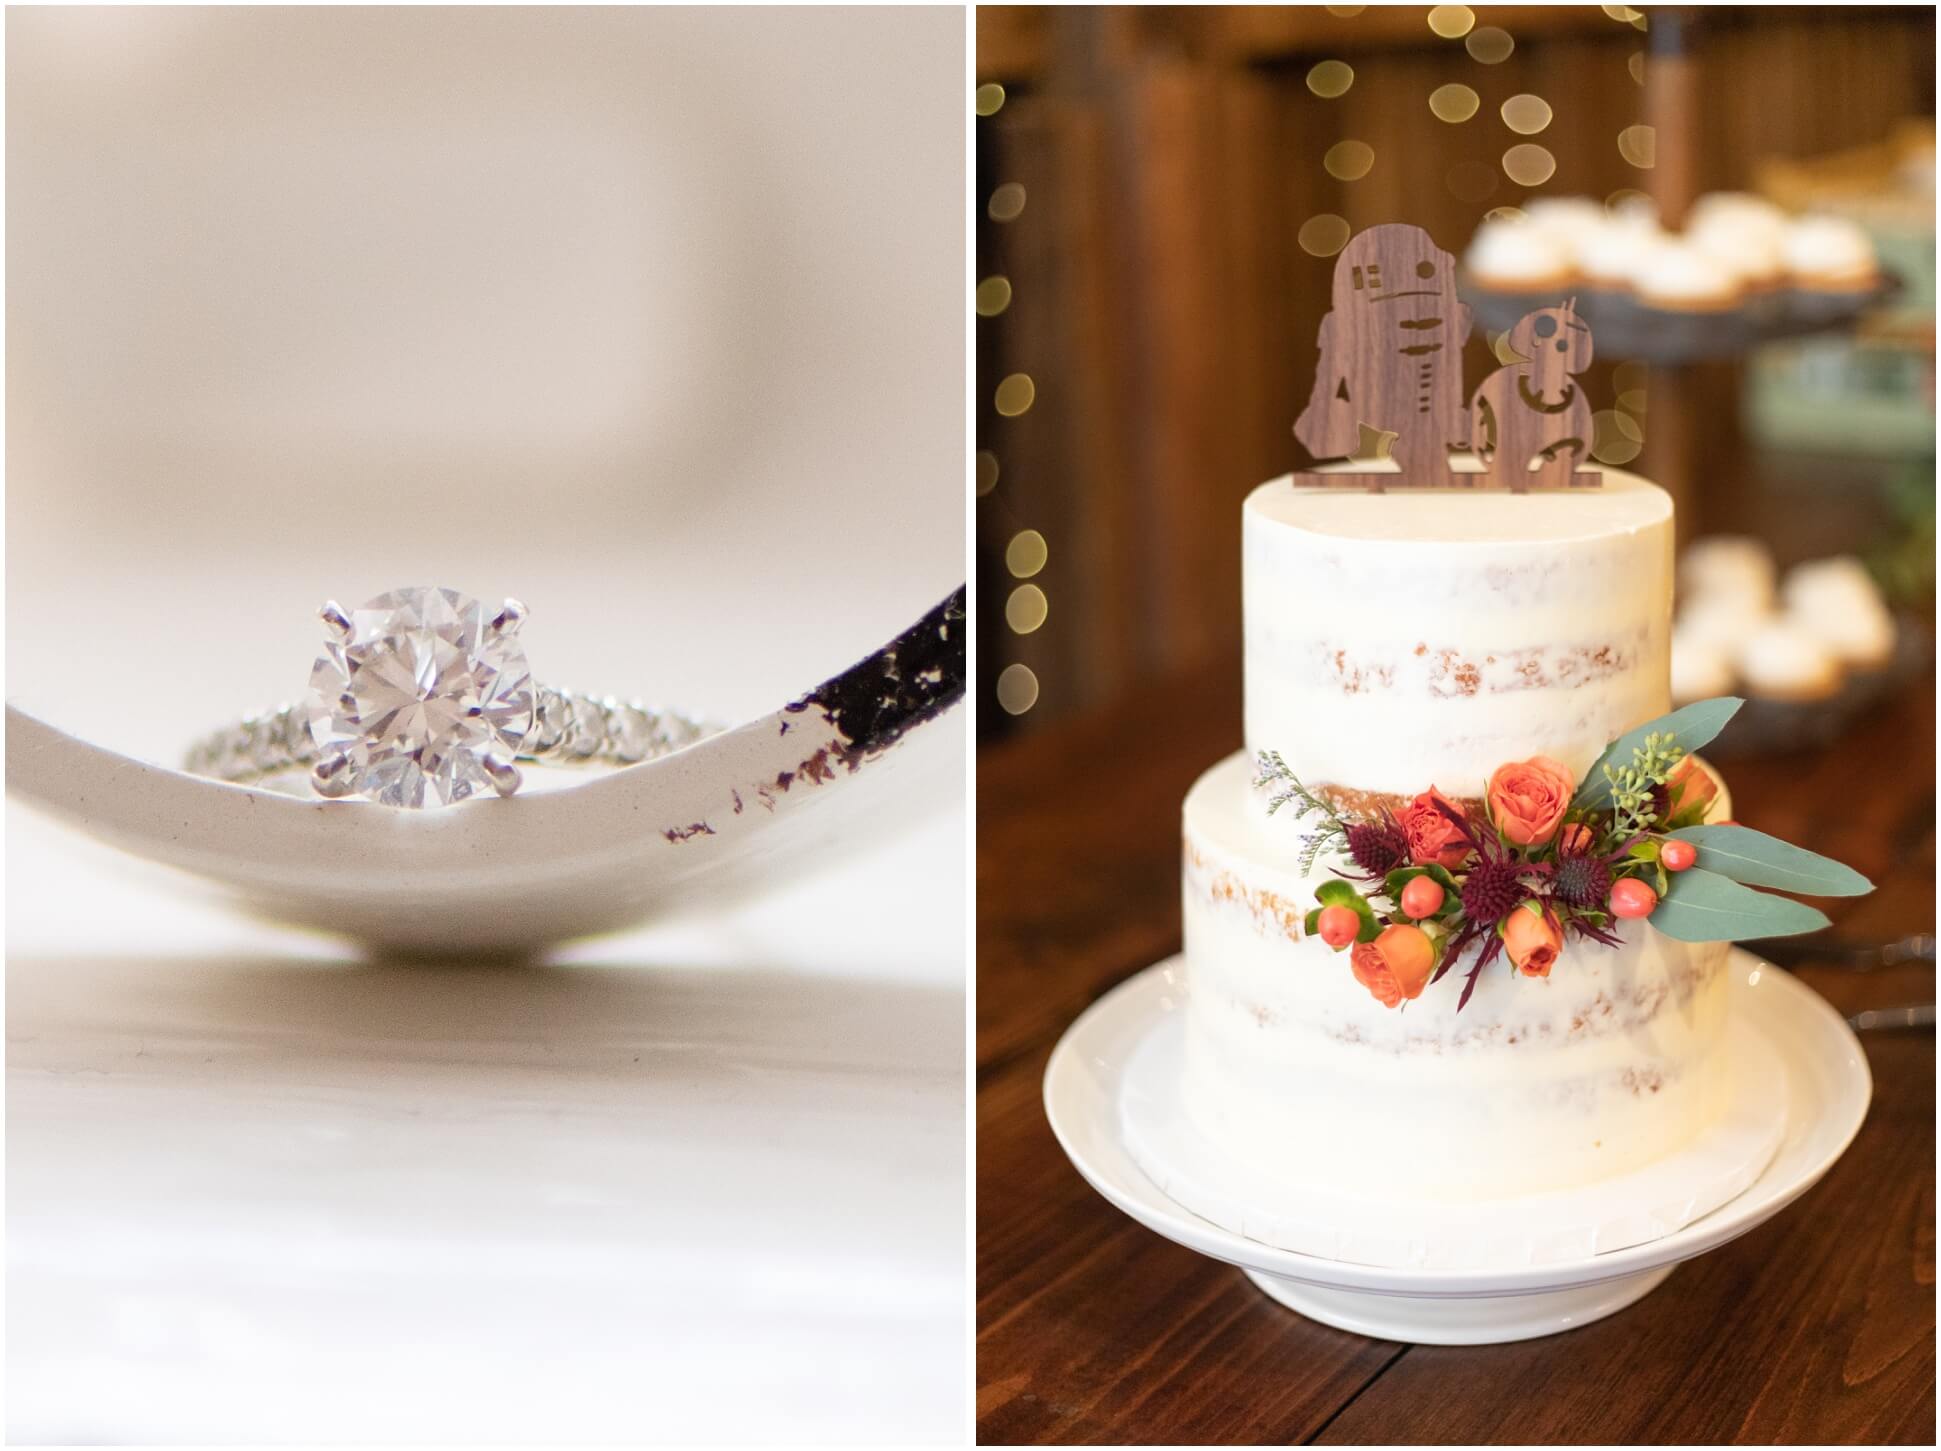 LEFT IMAGE: RING, RIGHT IMAGE: WEDDING CAKE WITH STAR WARS TOPPER